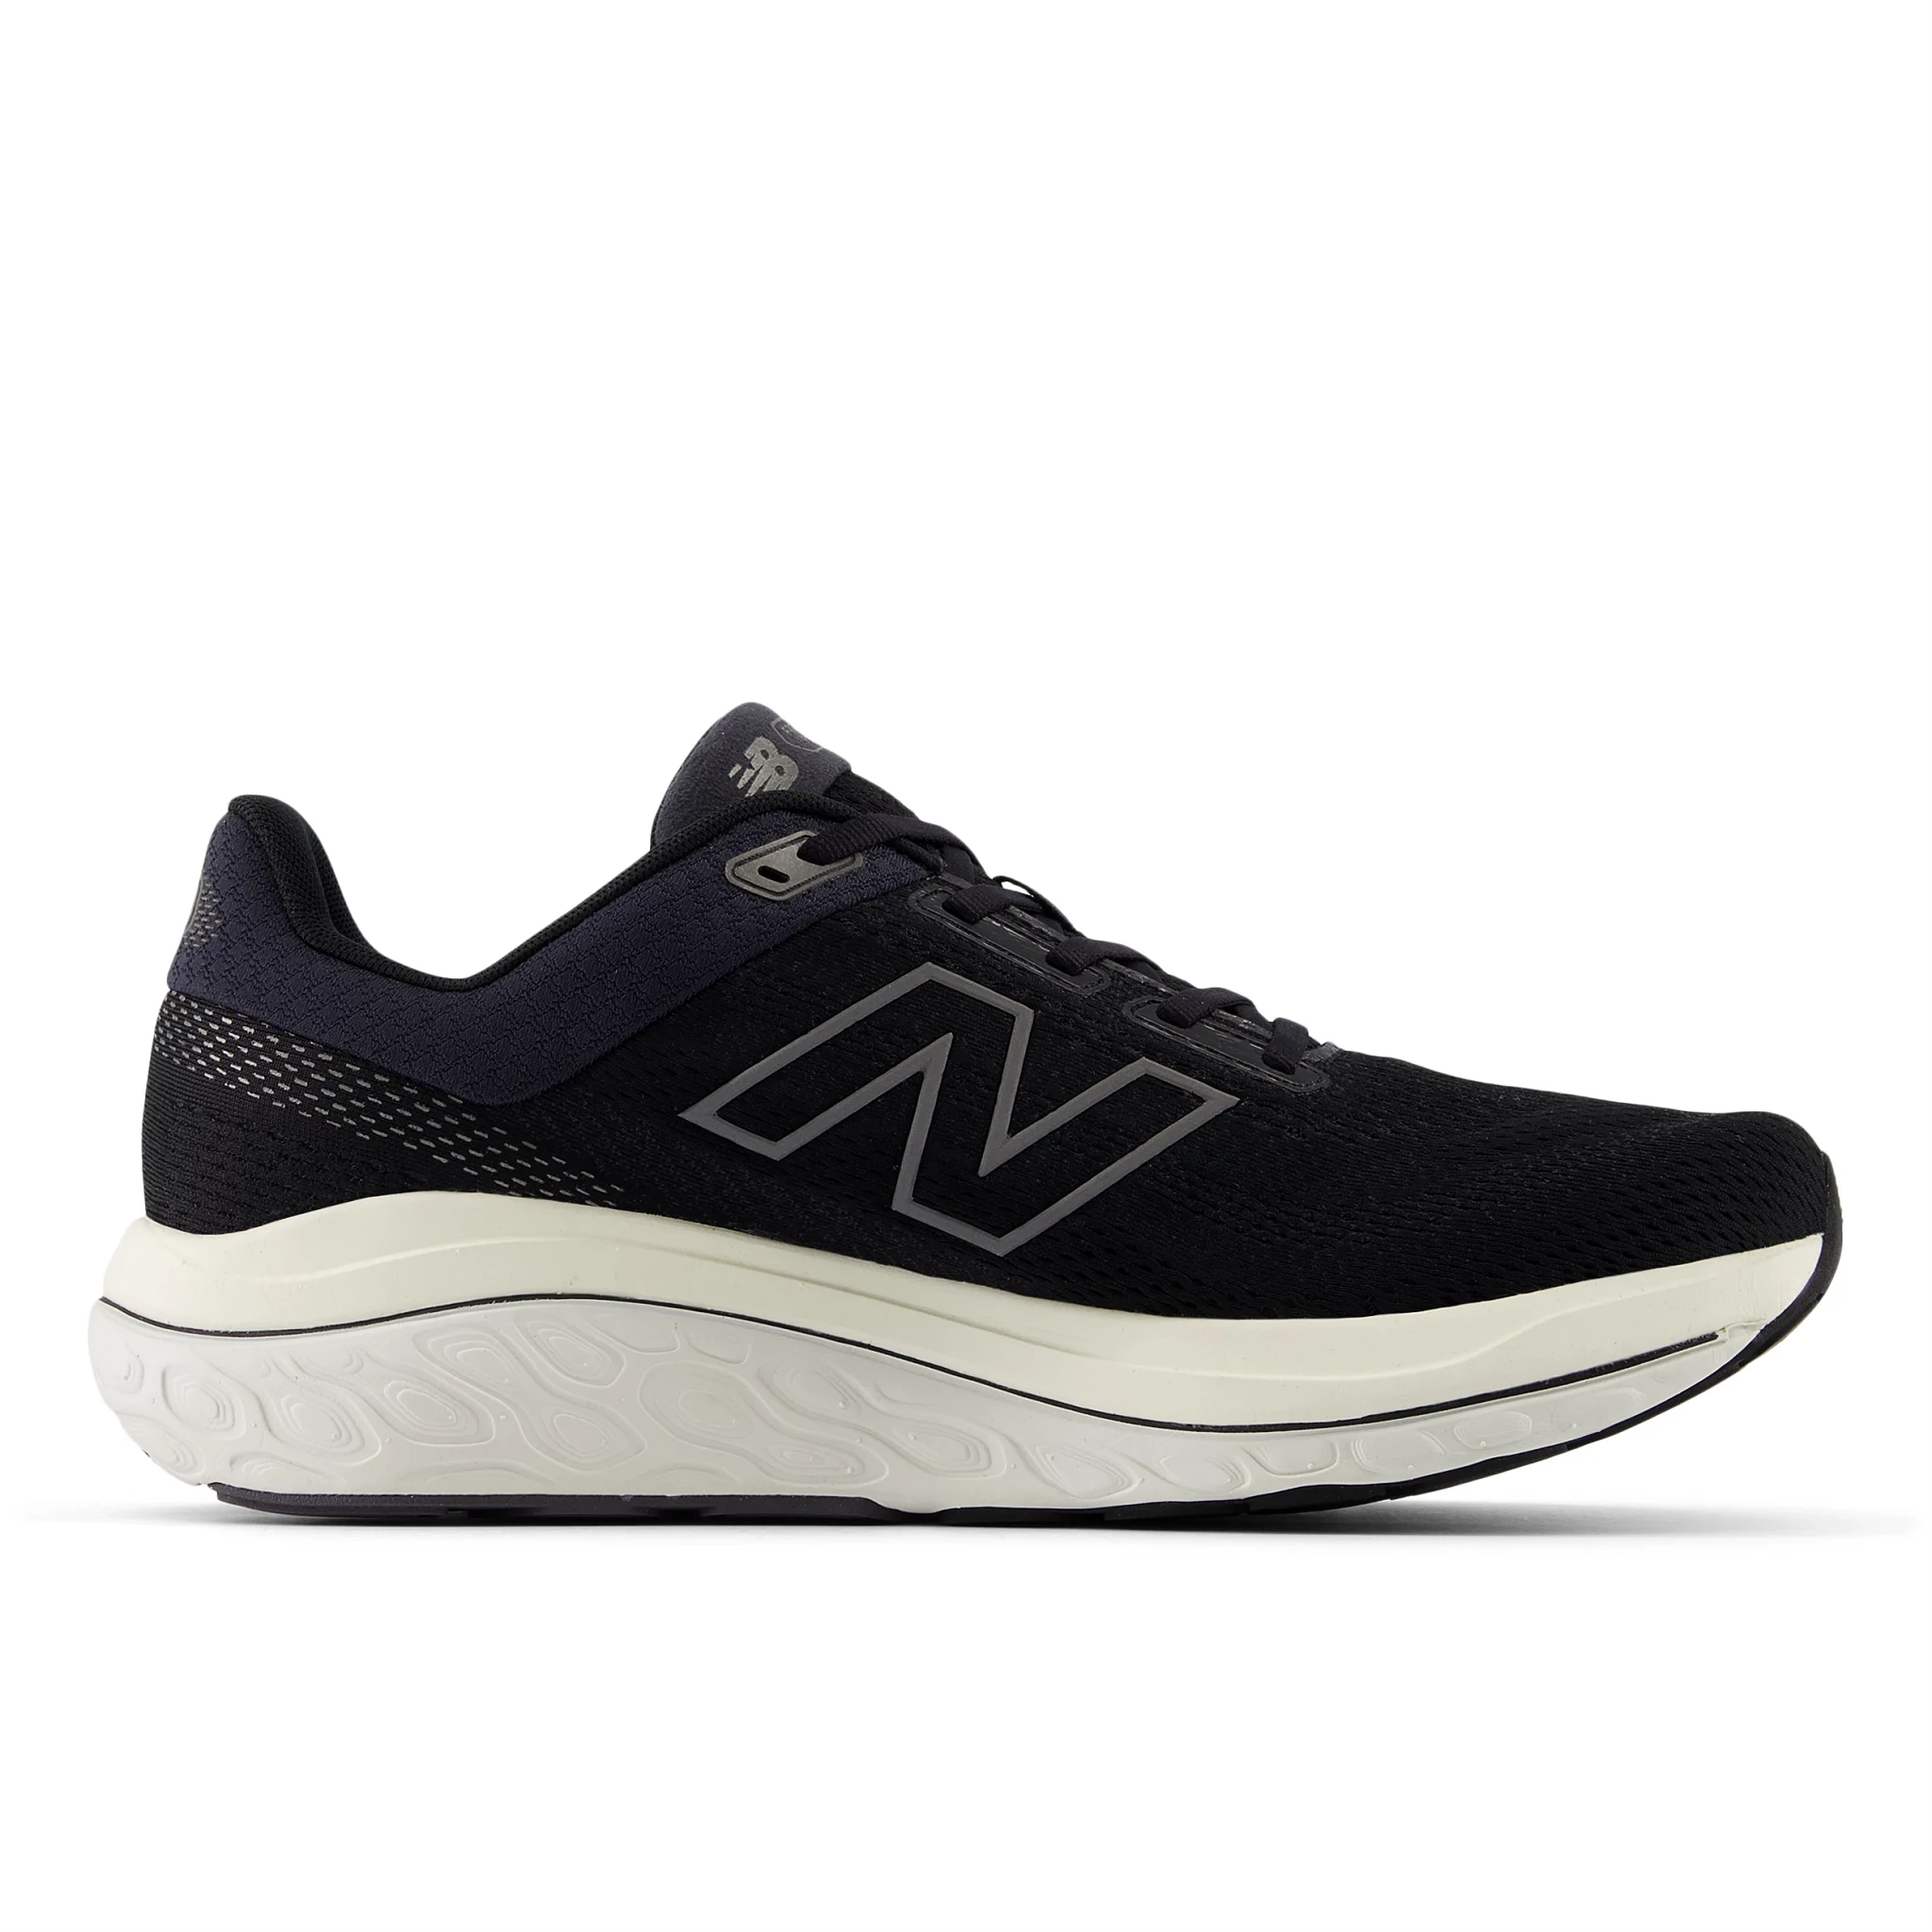 NEW BALANCE FOOTWEAR | Performance Running Outfitters